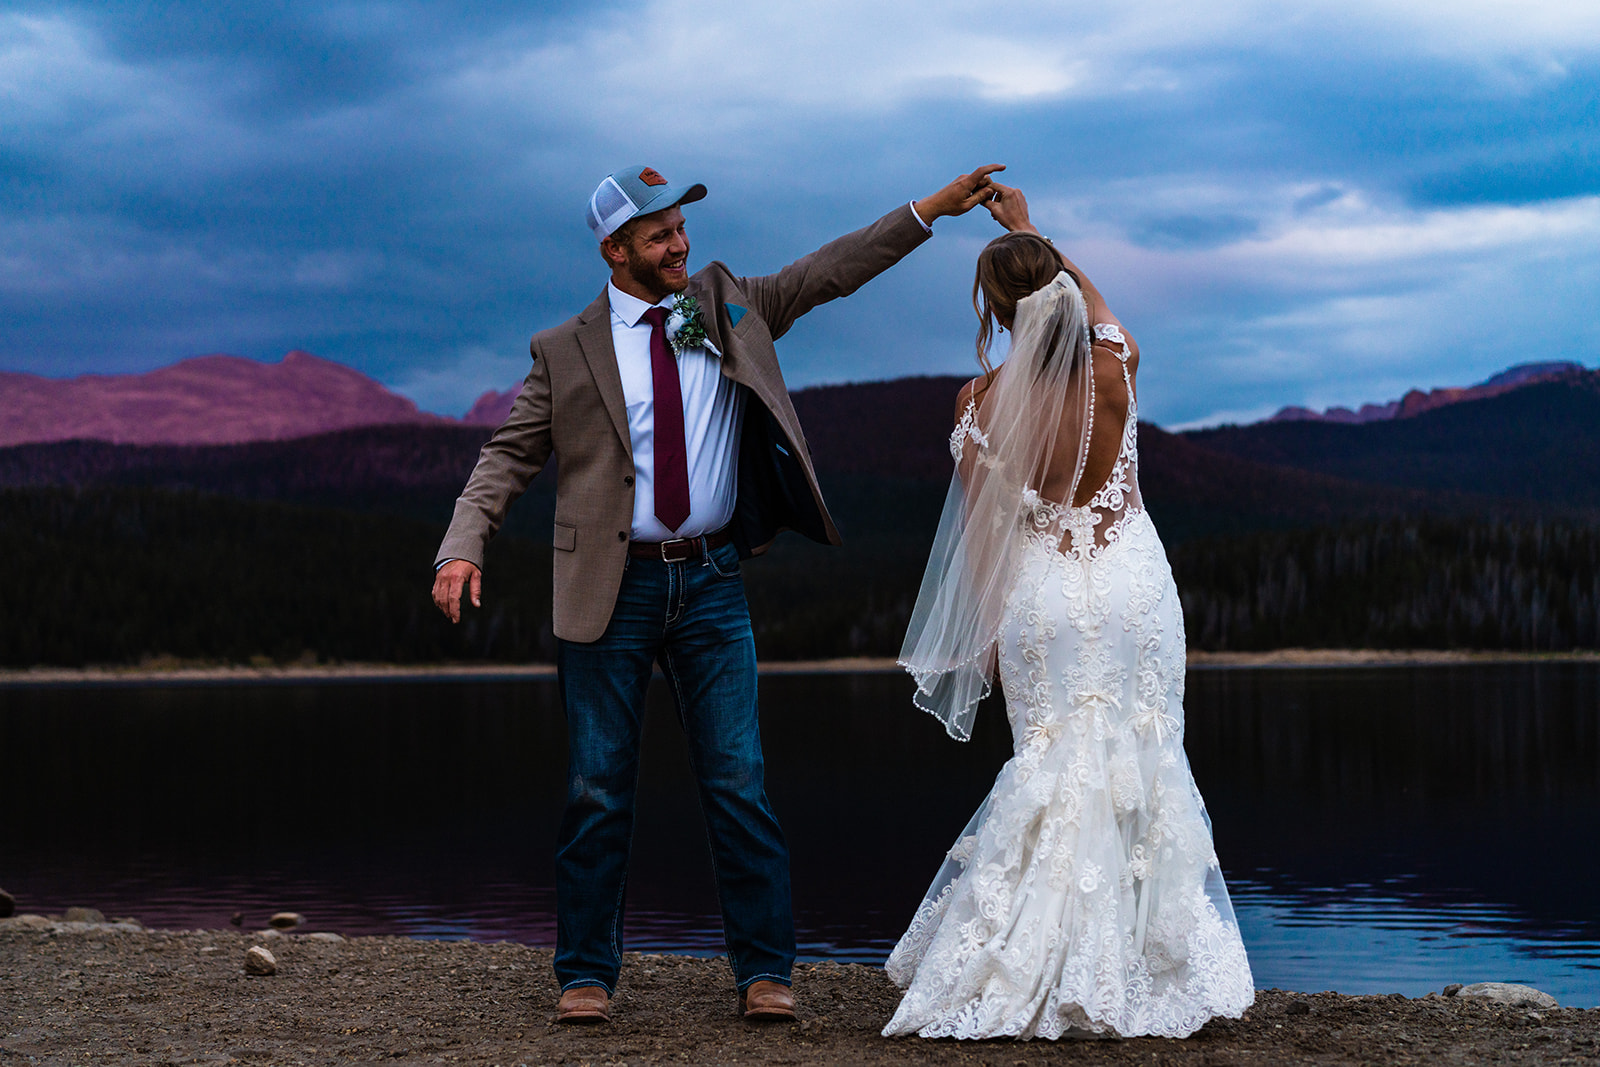 Bride and groom having their first dancing during sunset